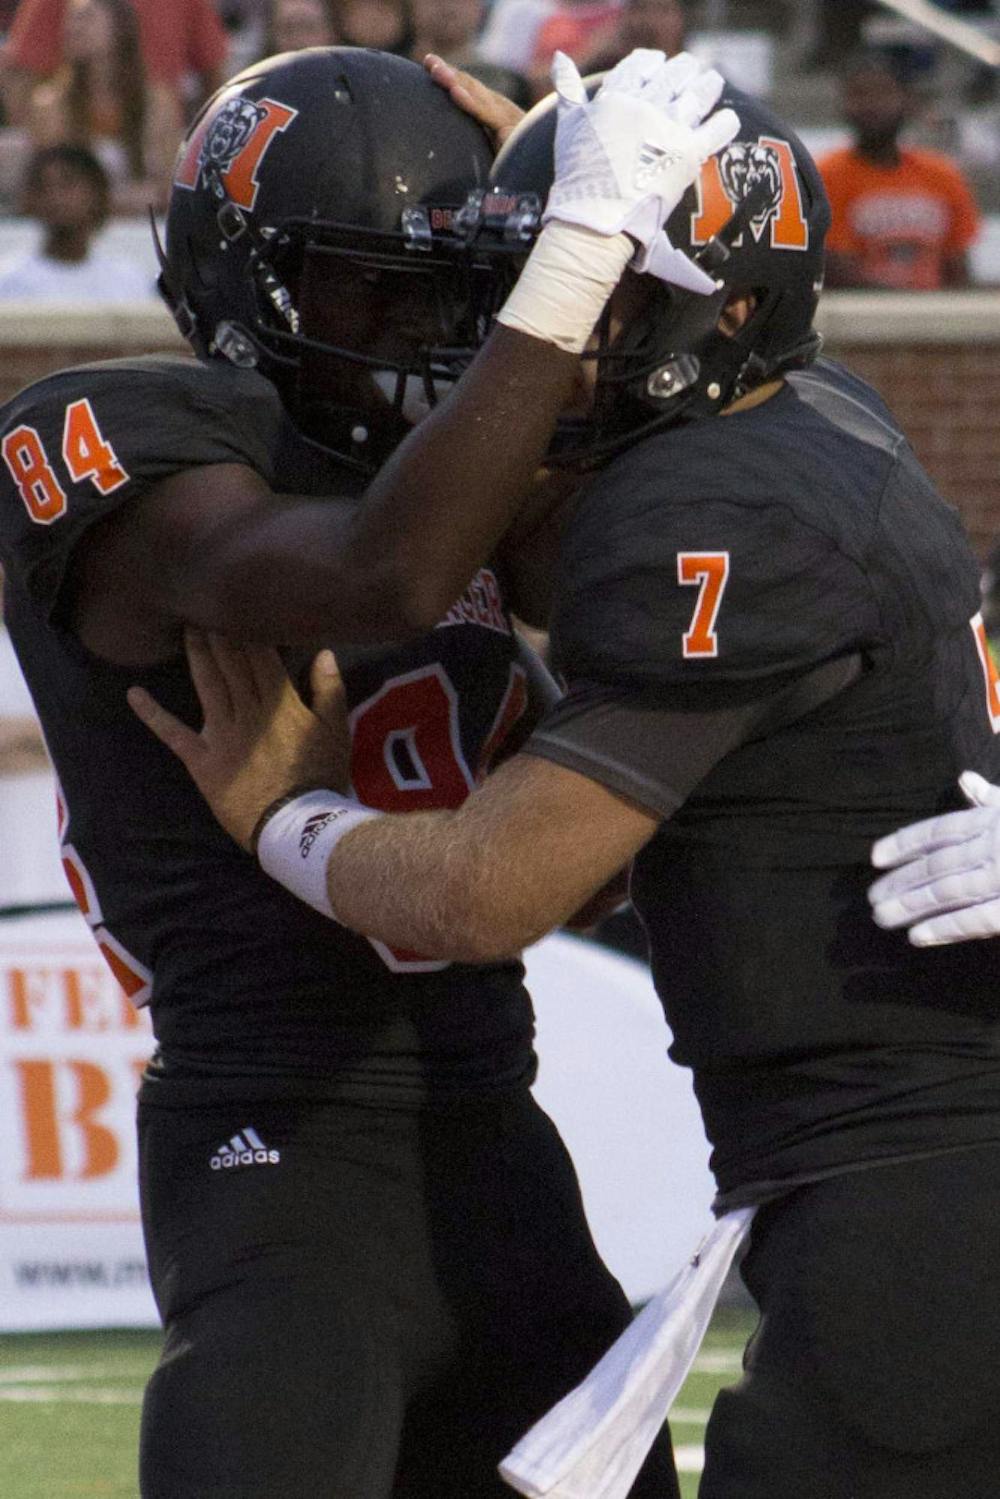 Mercer's Avery Ward (84), left, and John Russ (7) celebrate after the first touchdown in their game against The Citadel.